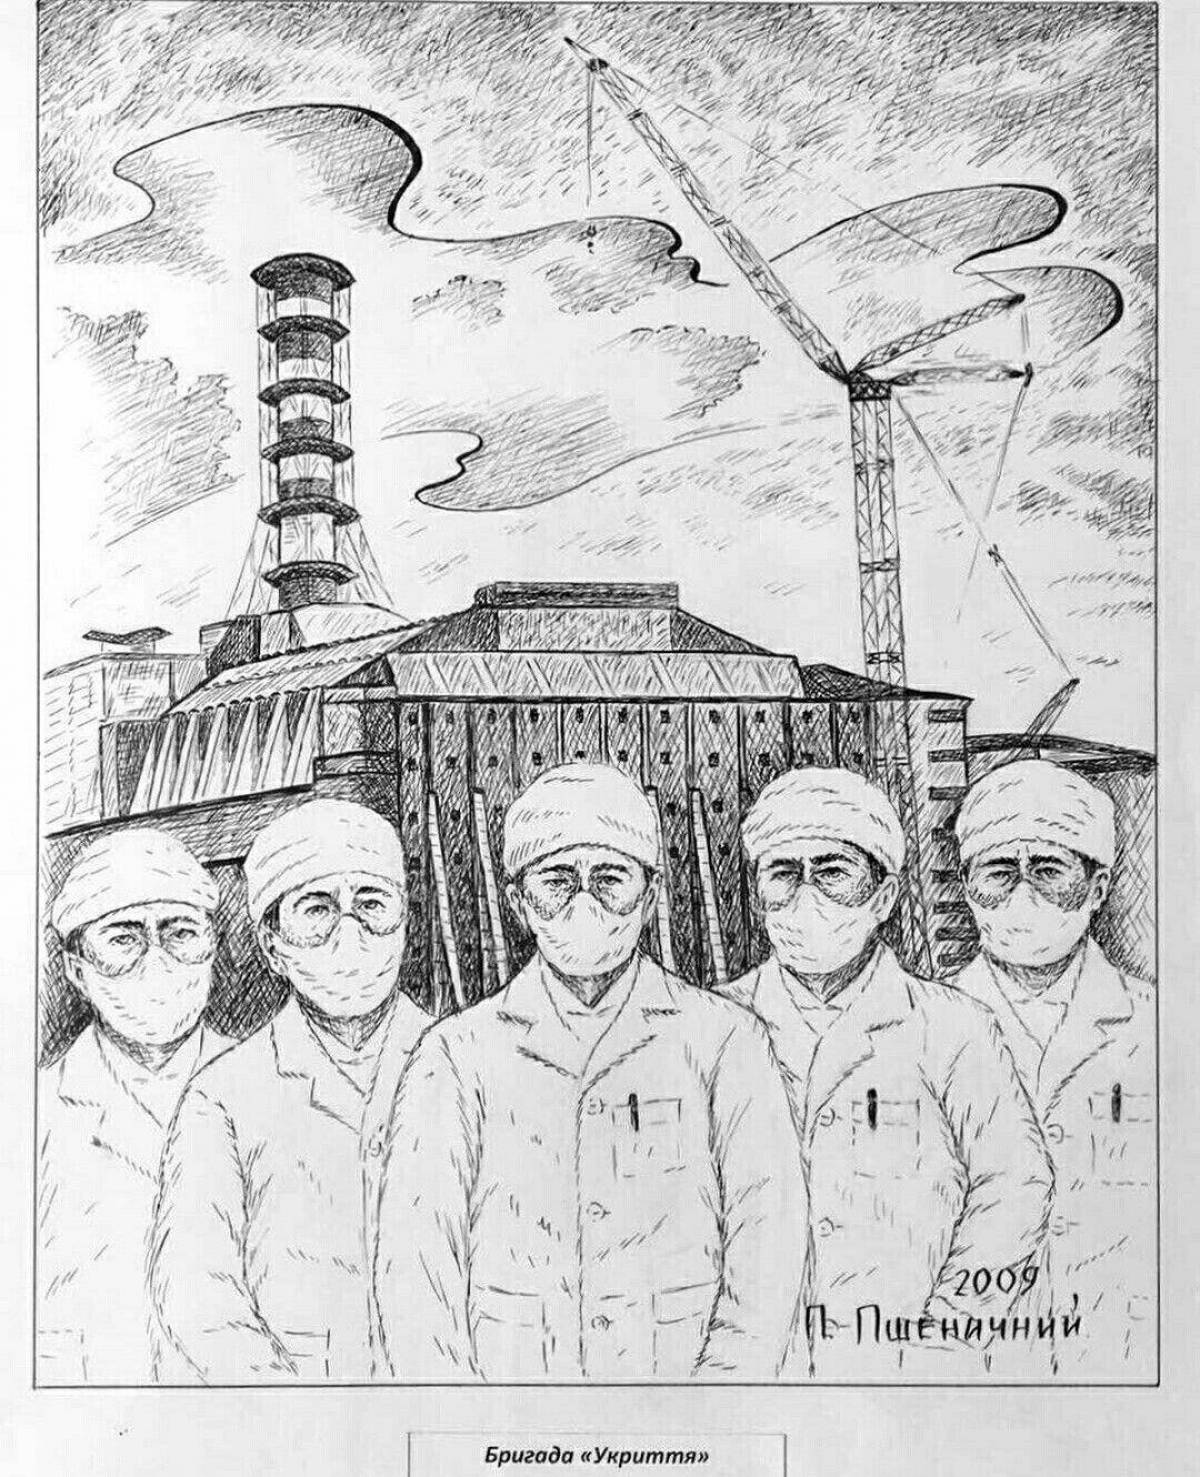 Coloring page charming Chernobyl station